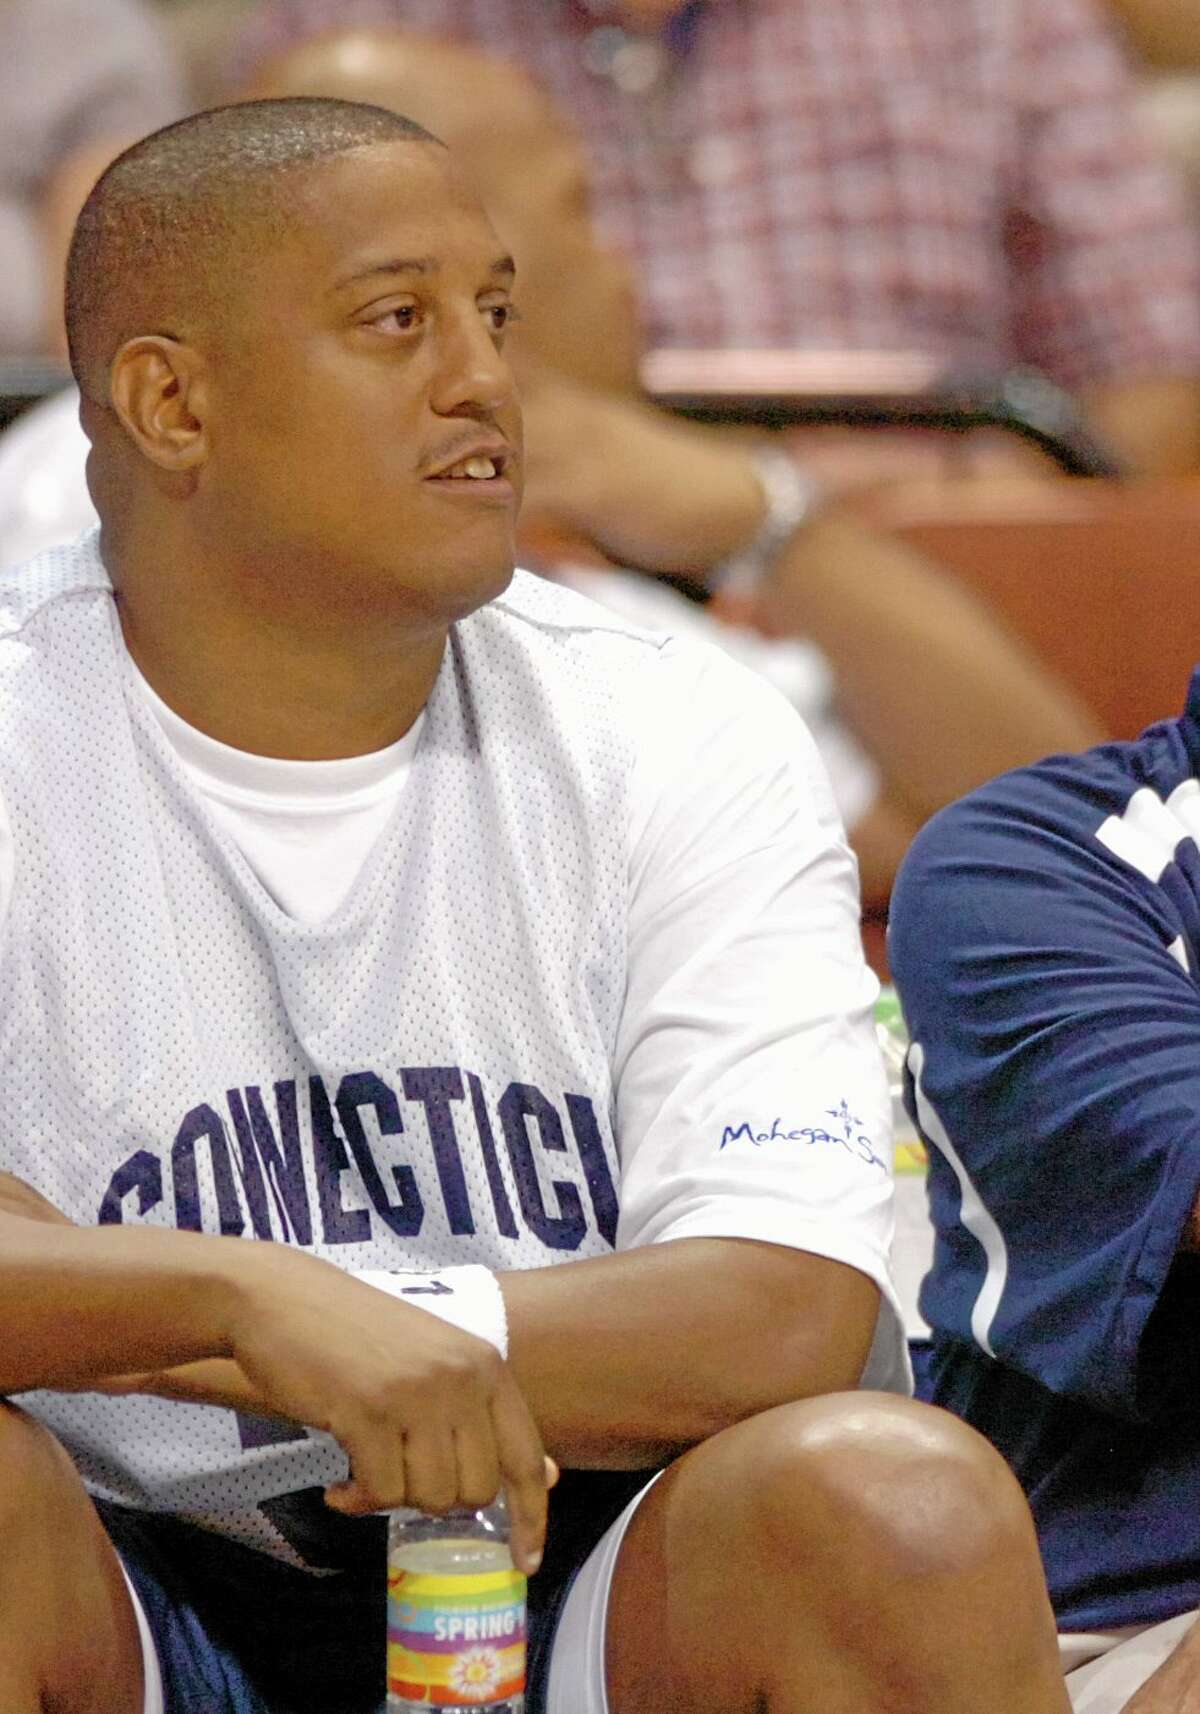 This Aug. 8, 2008 file photo shows former NBA and UConn player Tate George during the Jim Calhoun Celebrity Classic basketball game at the Mohegan Sun Arena in Uncasville.